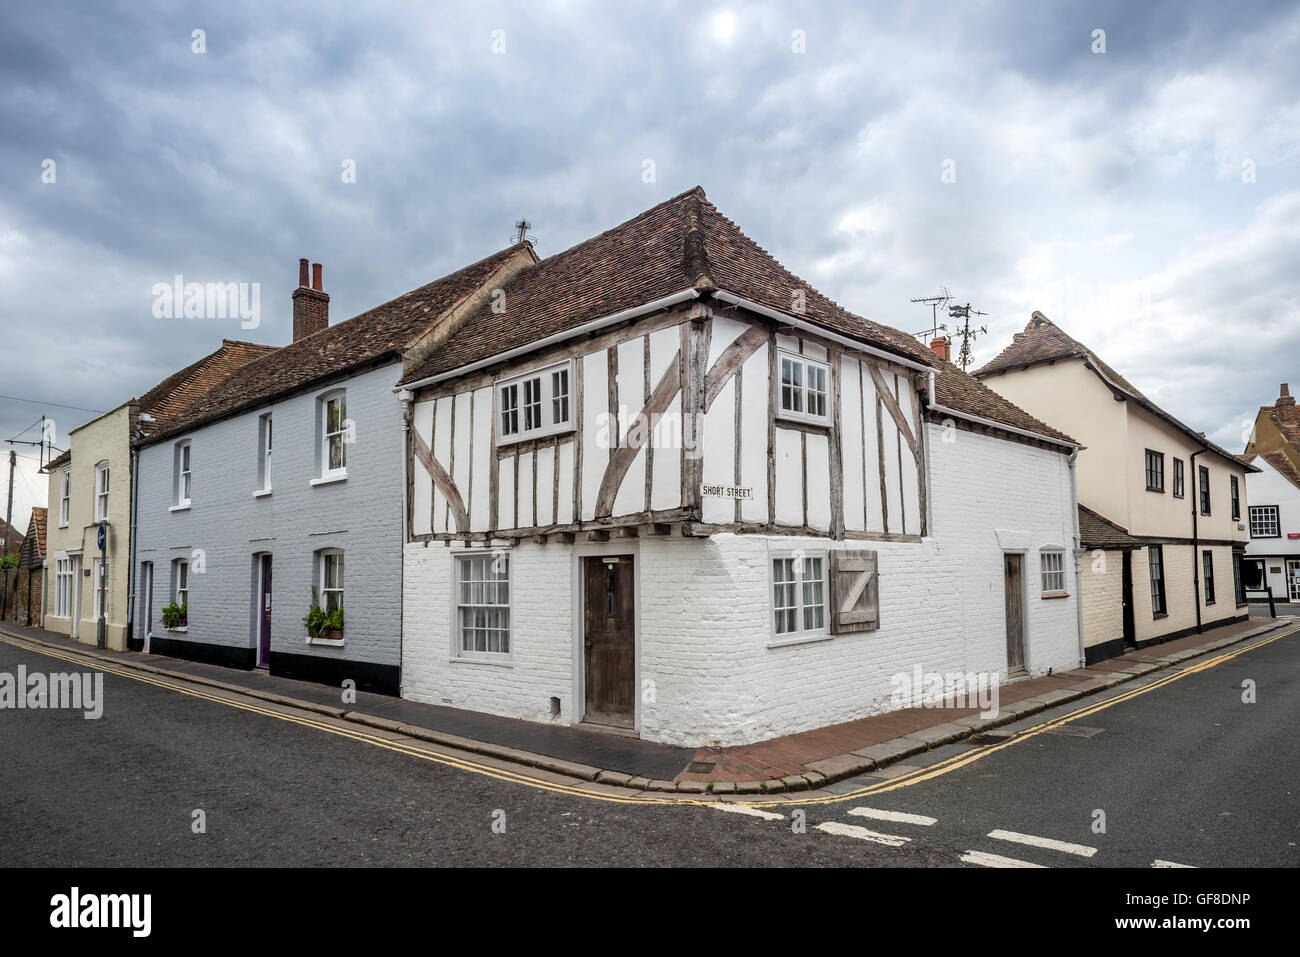 Street scenes in the historic town of Sandwich in Kent. Stock Photo